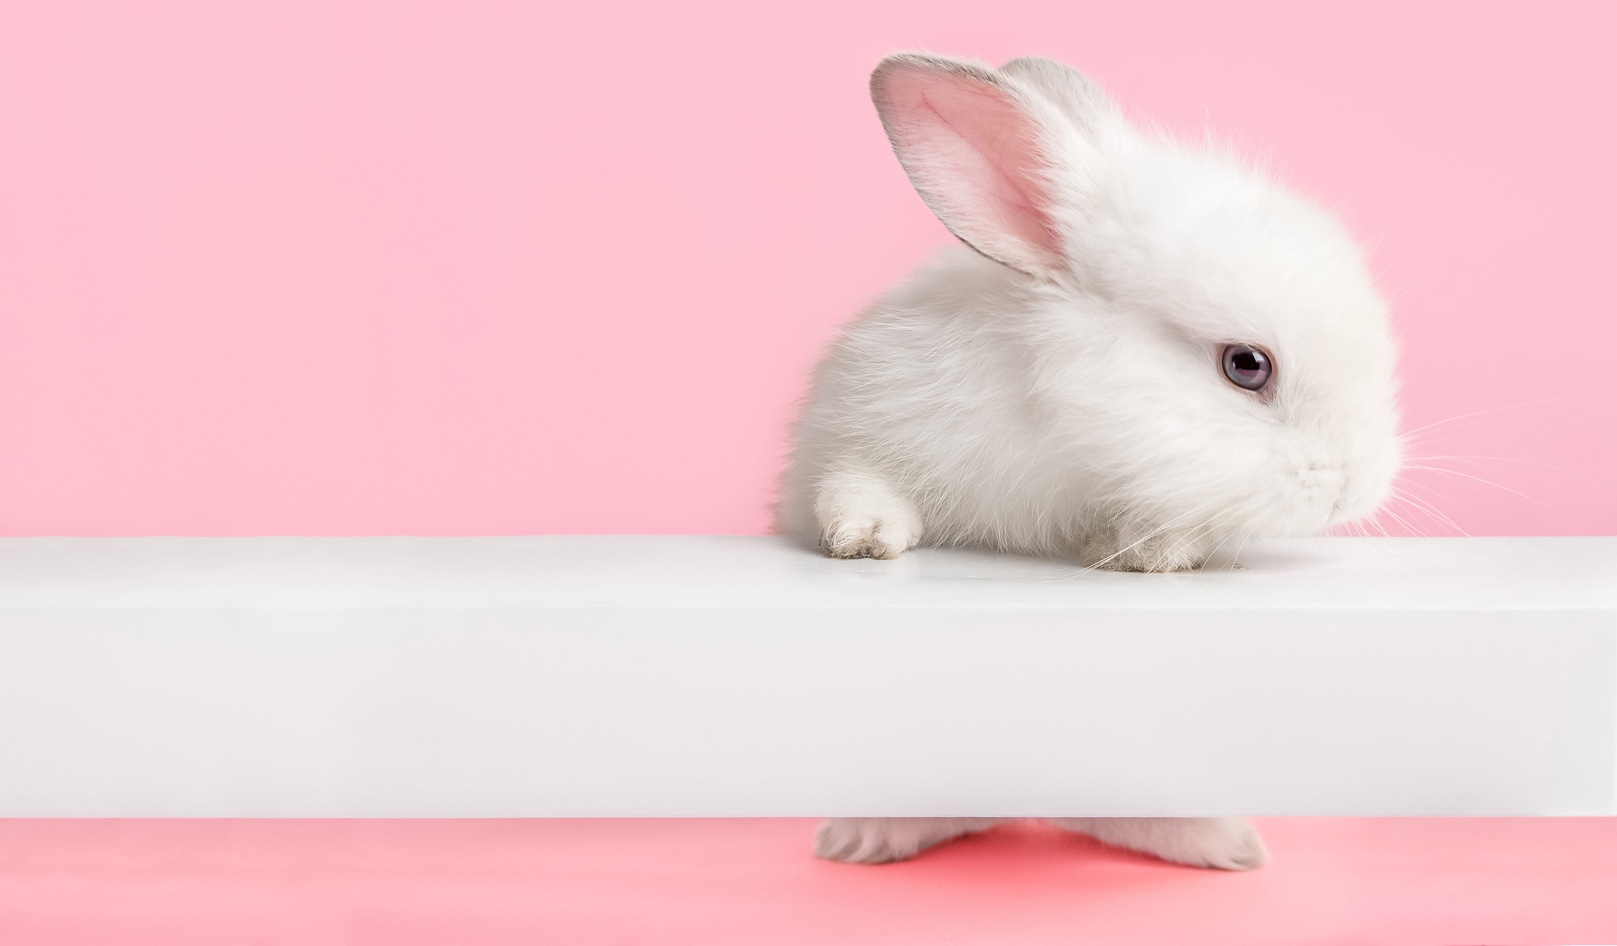 Hawaii To Become Sixth State to End Cosmetic Animal Testing | VegNews